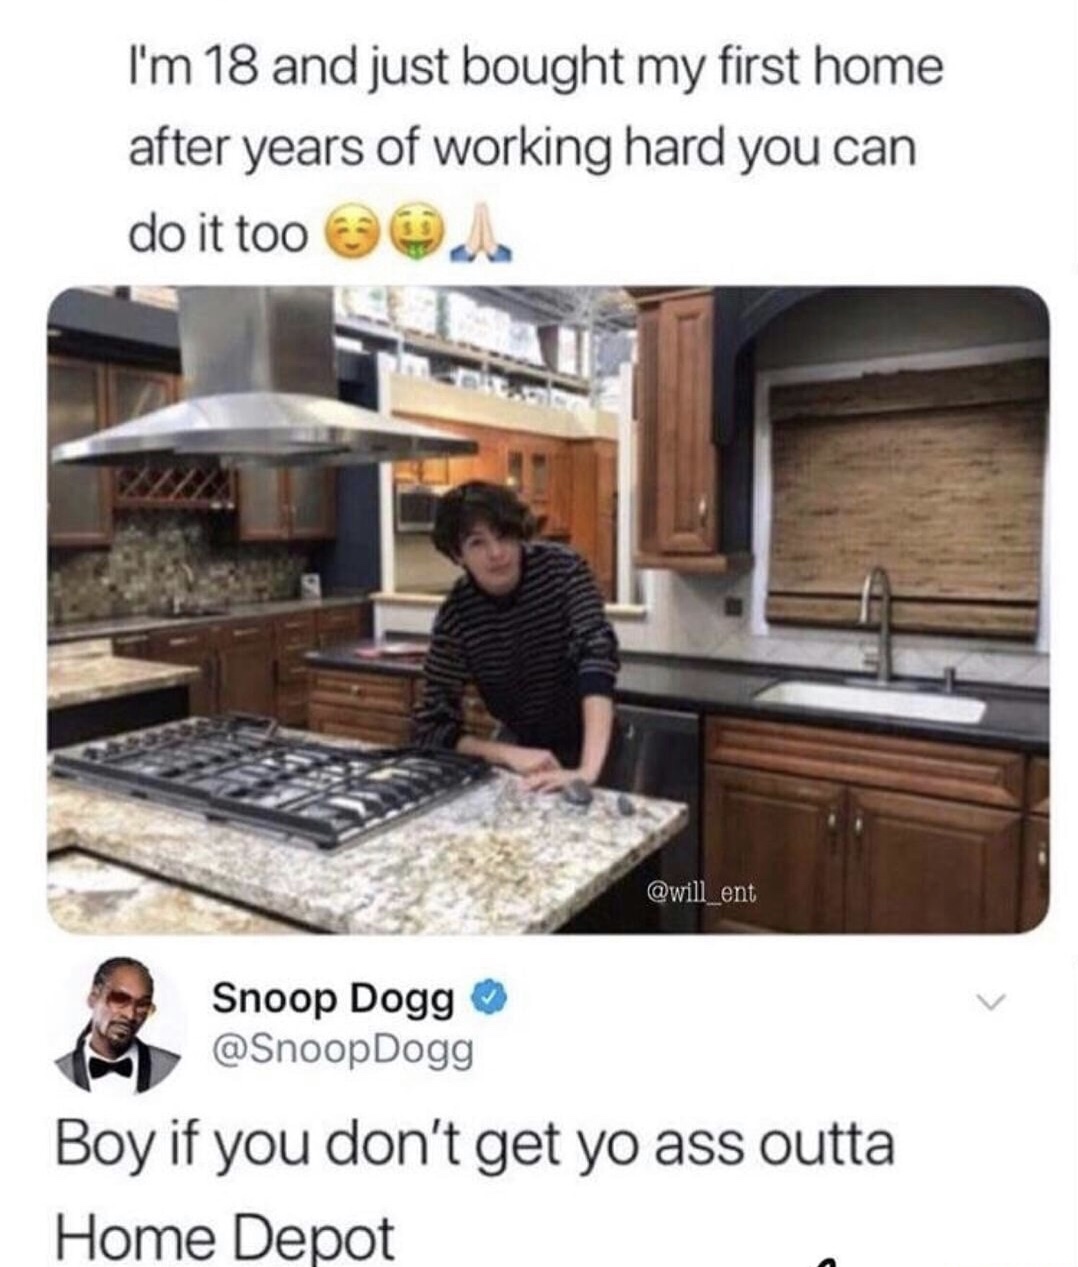 boy if you don t get your ass outta home depot - I'm 18 and just bought my first home after years of working hard you can do it too Snoop Dogg Dogg Boy if you don't get yo ass outta Home Depot